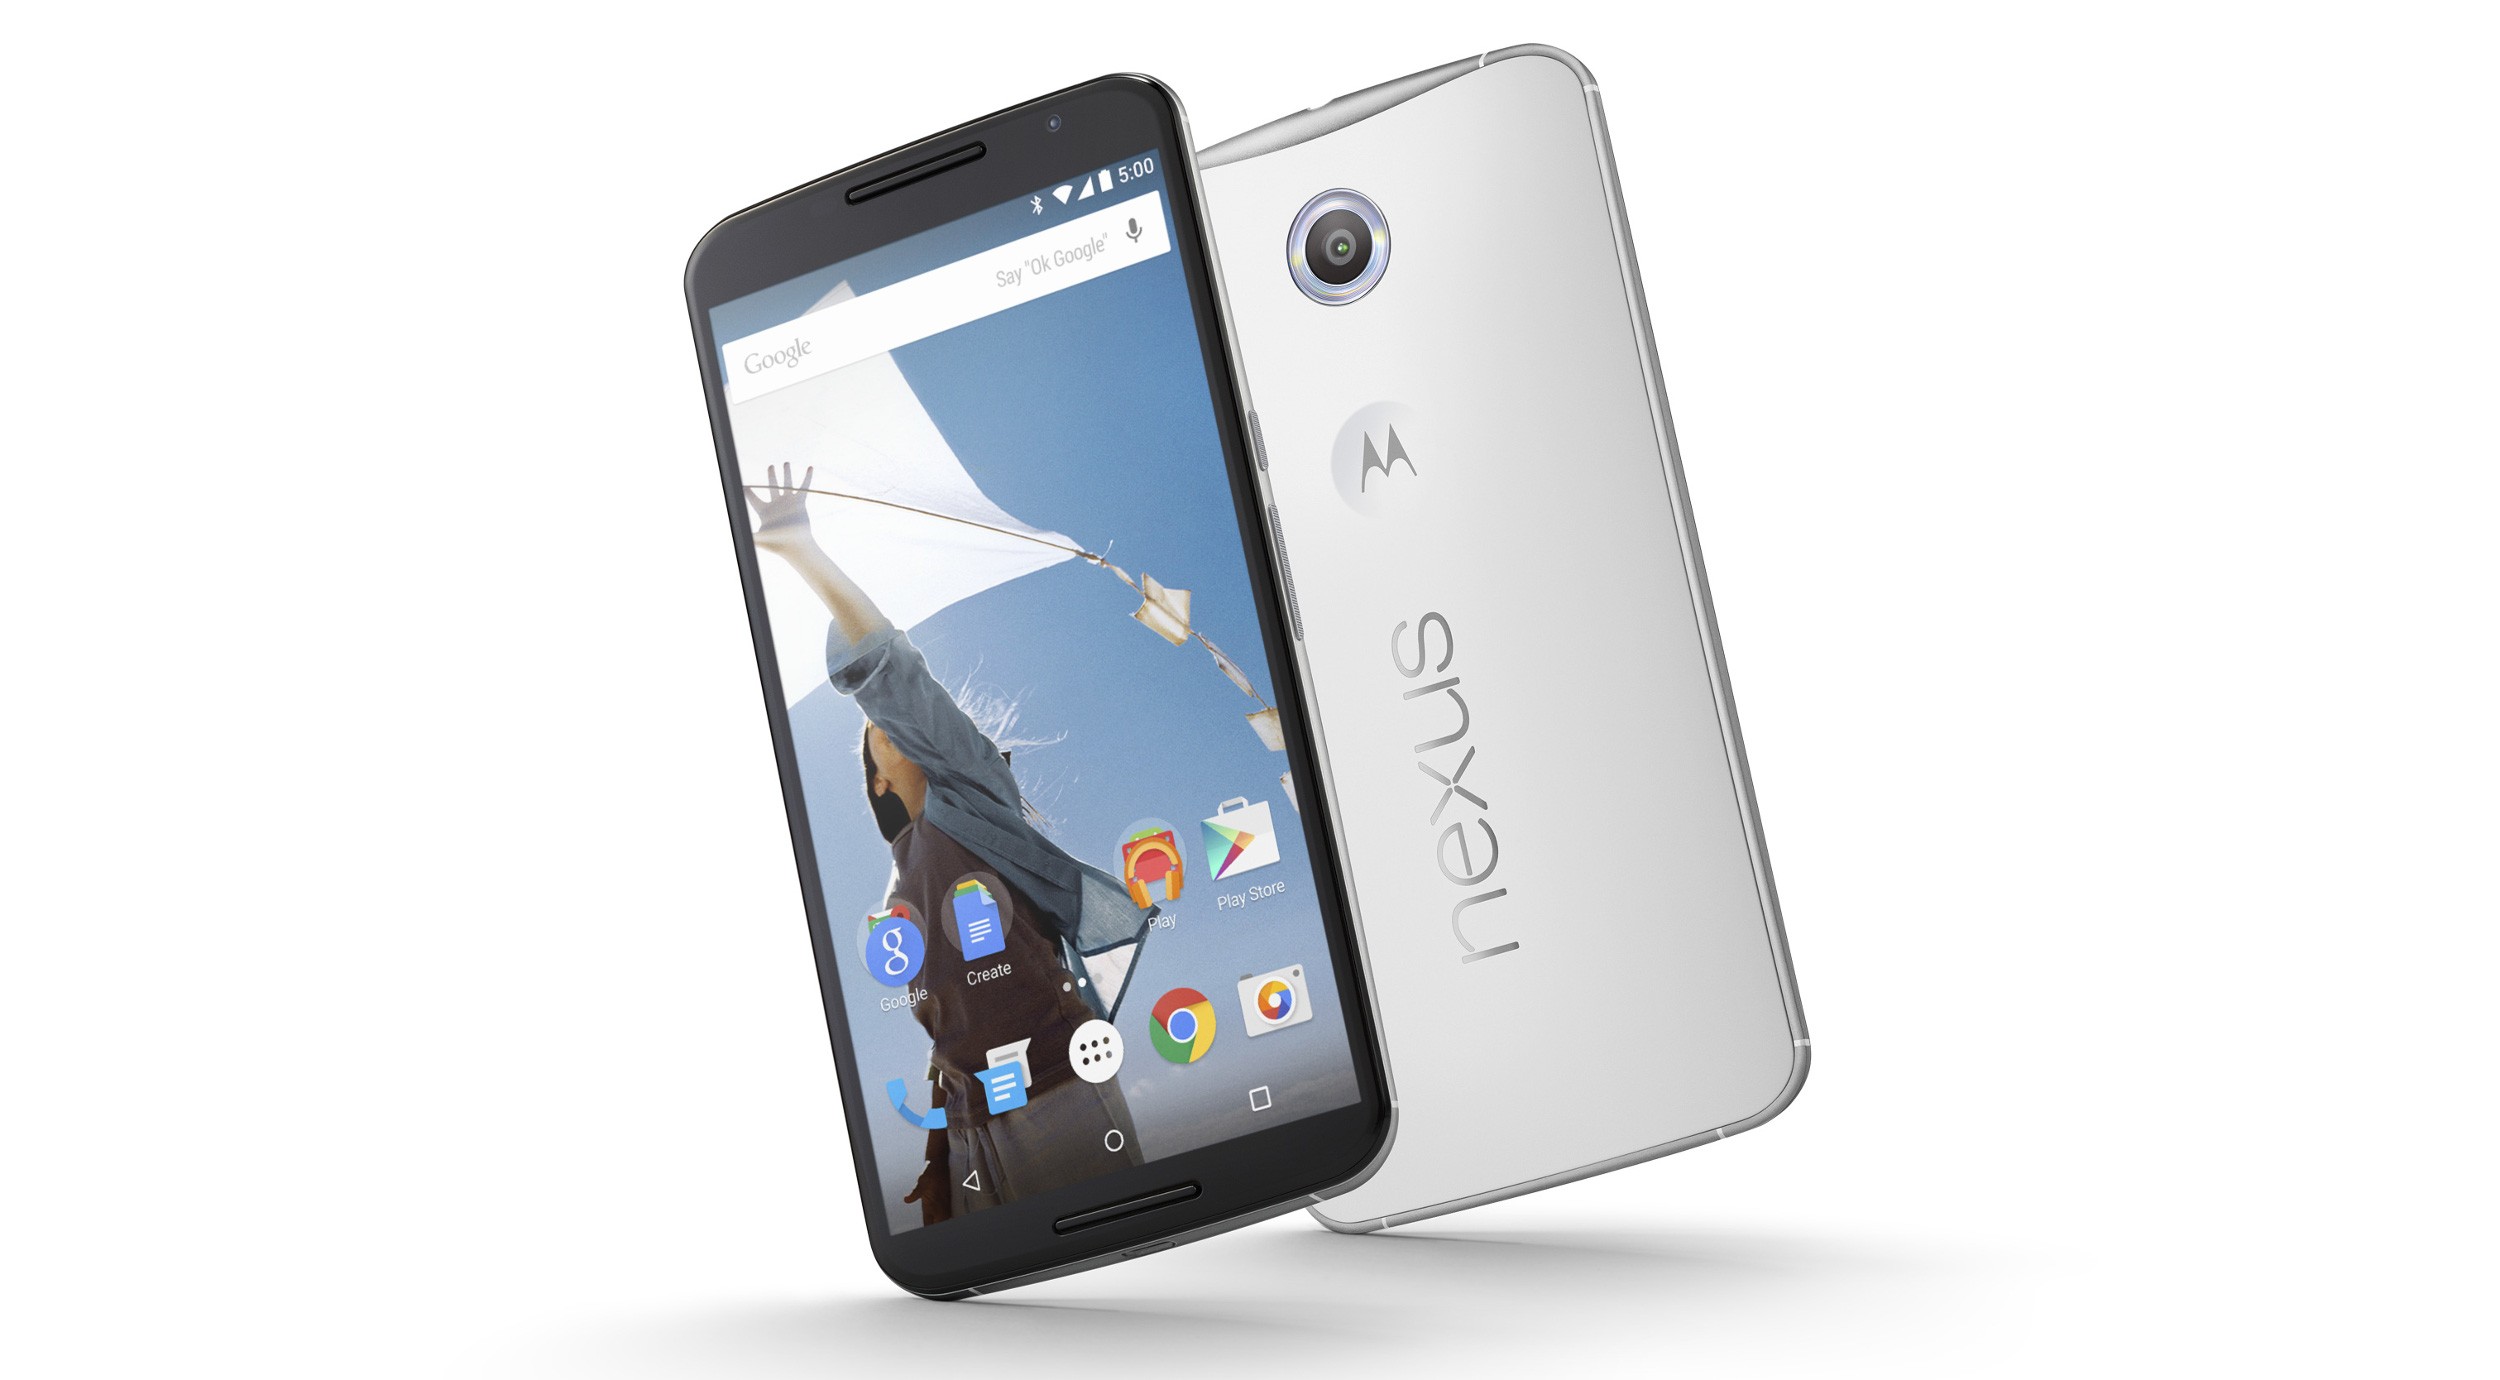 Nexus 6 Android 5.1 Lollipop Factory Image Now Available ...